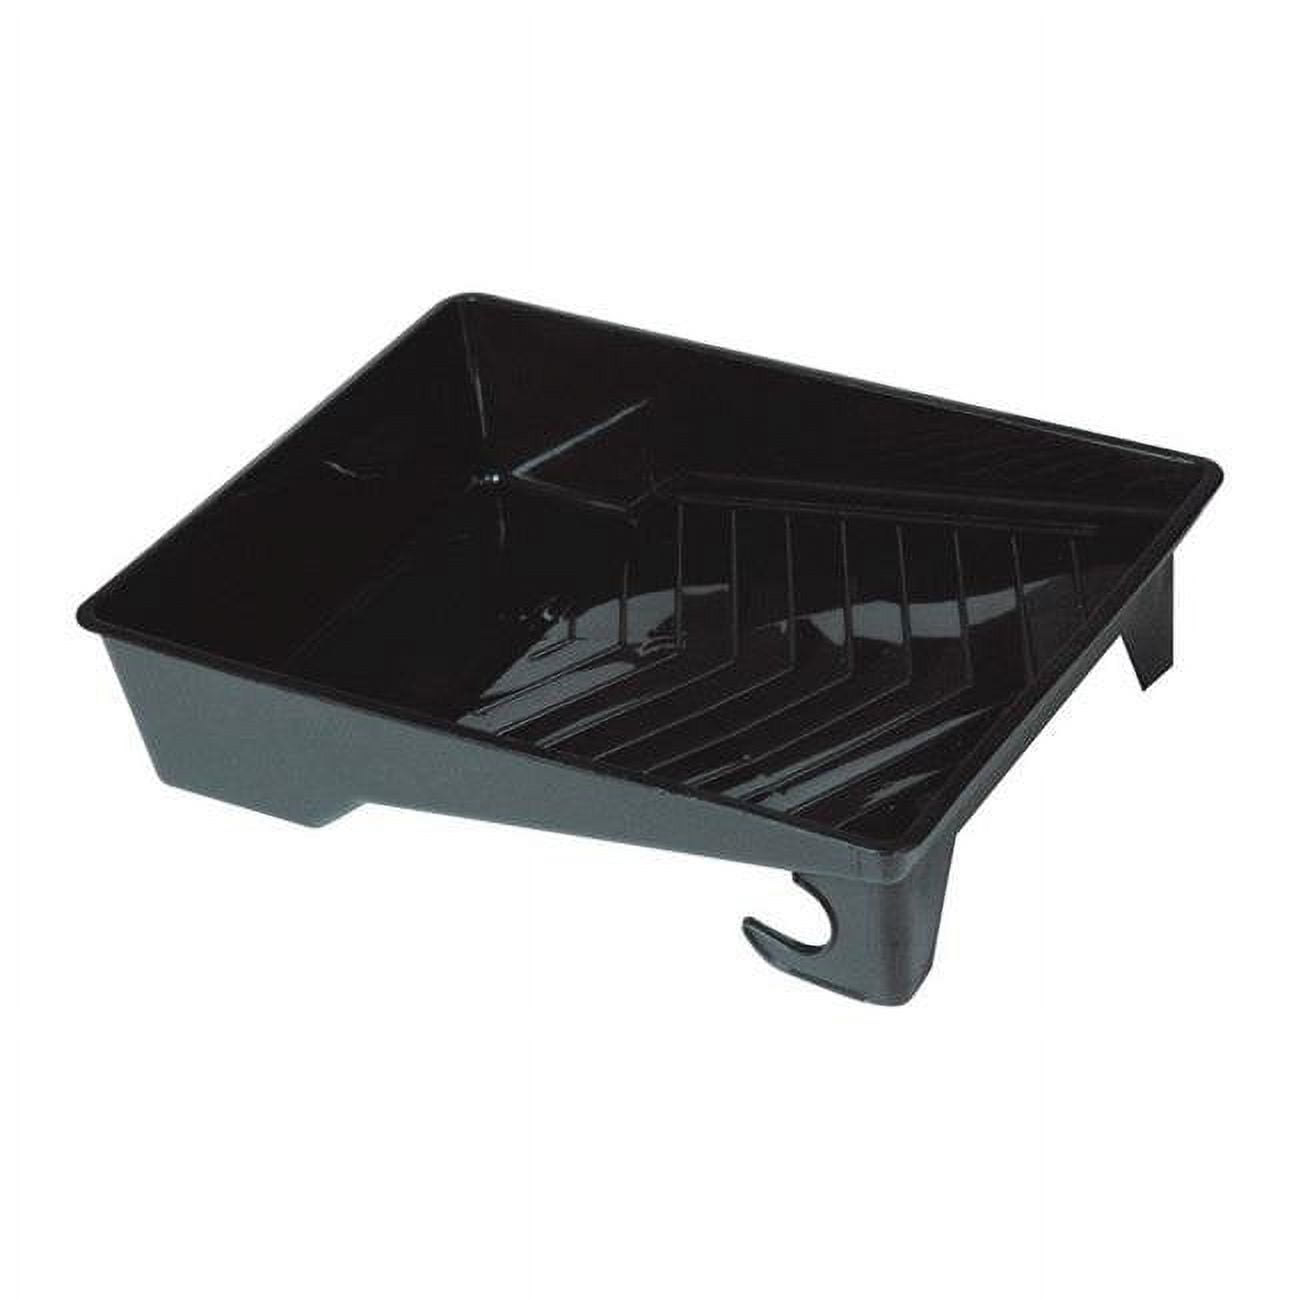 1895689 9 In. Plastic Paint Tray, Black, 50 Per Pack - Case Of 12